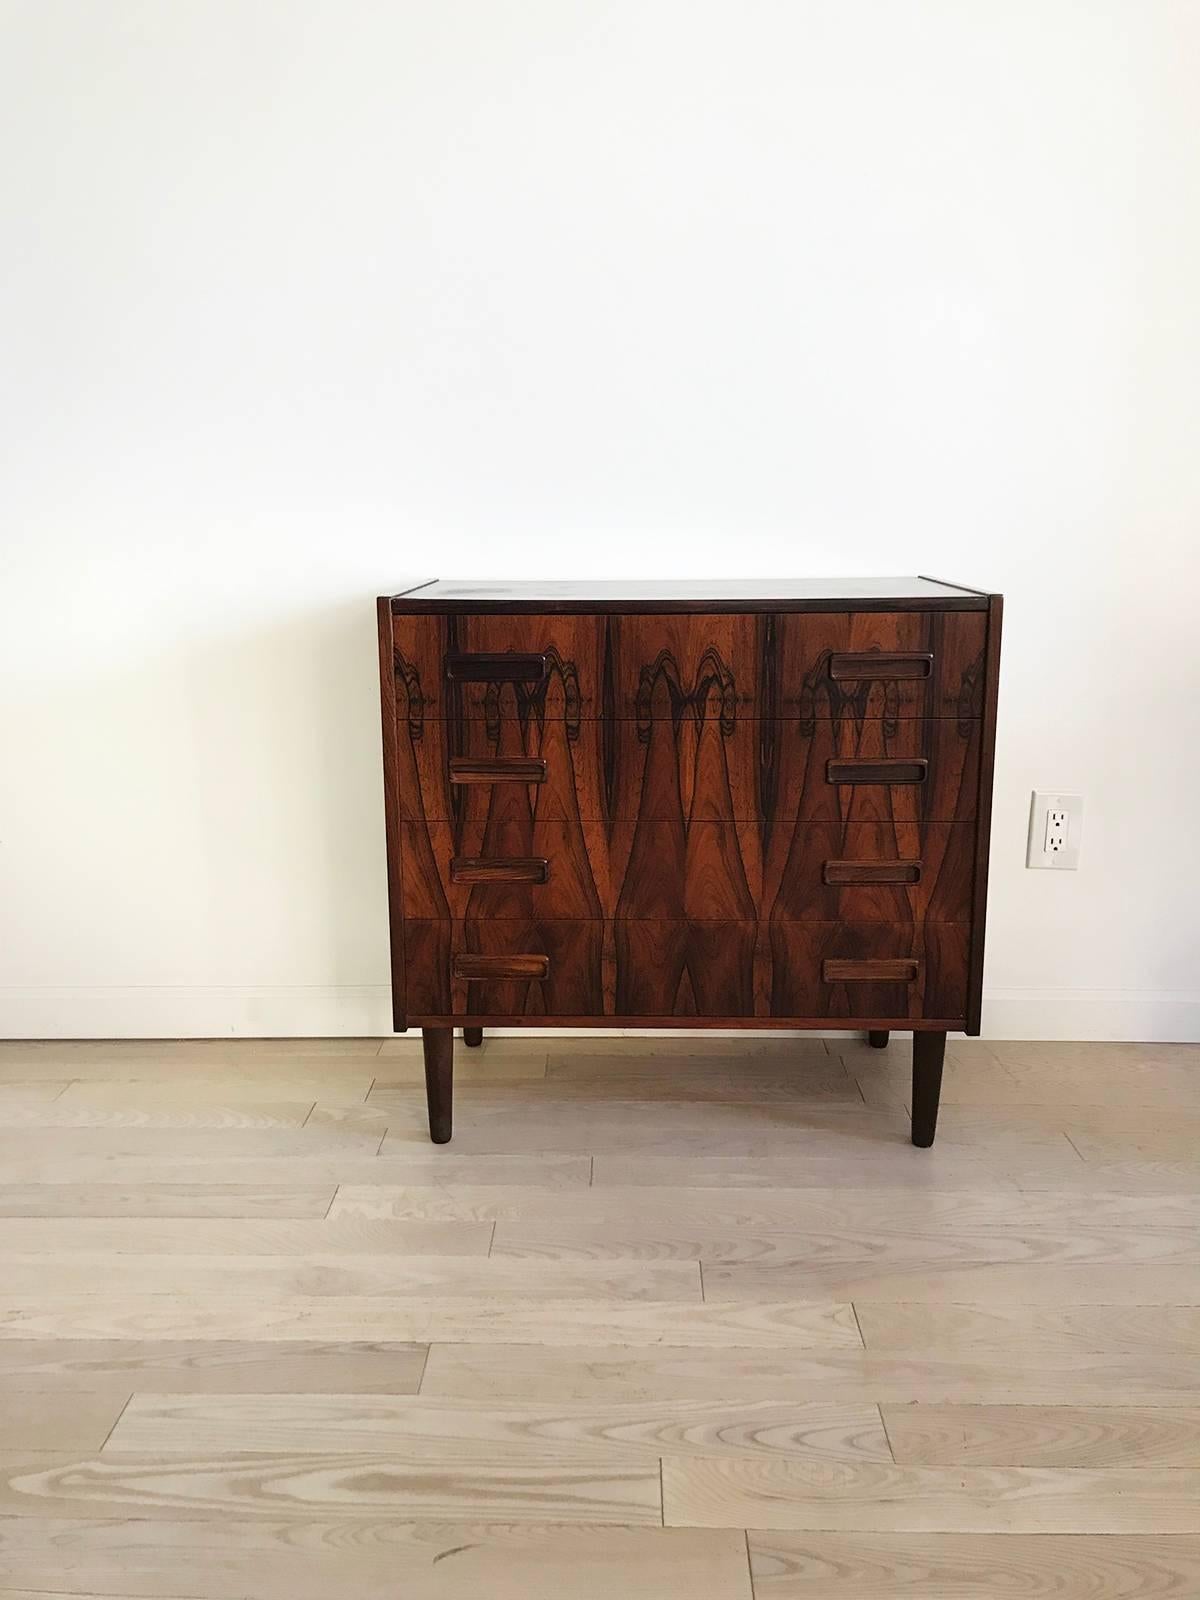 Beautiful grain and bookmatched rosewood on this midcentury Danish chest of drawers. Four drawers, peg legs and rosewood pulls. Classic Danish design in a stunning vibrate rosewood. Water mark ring on top back left corner, pictured. Drawers pull